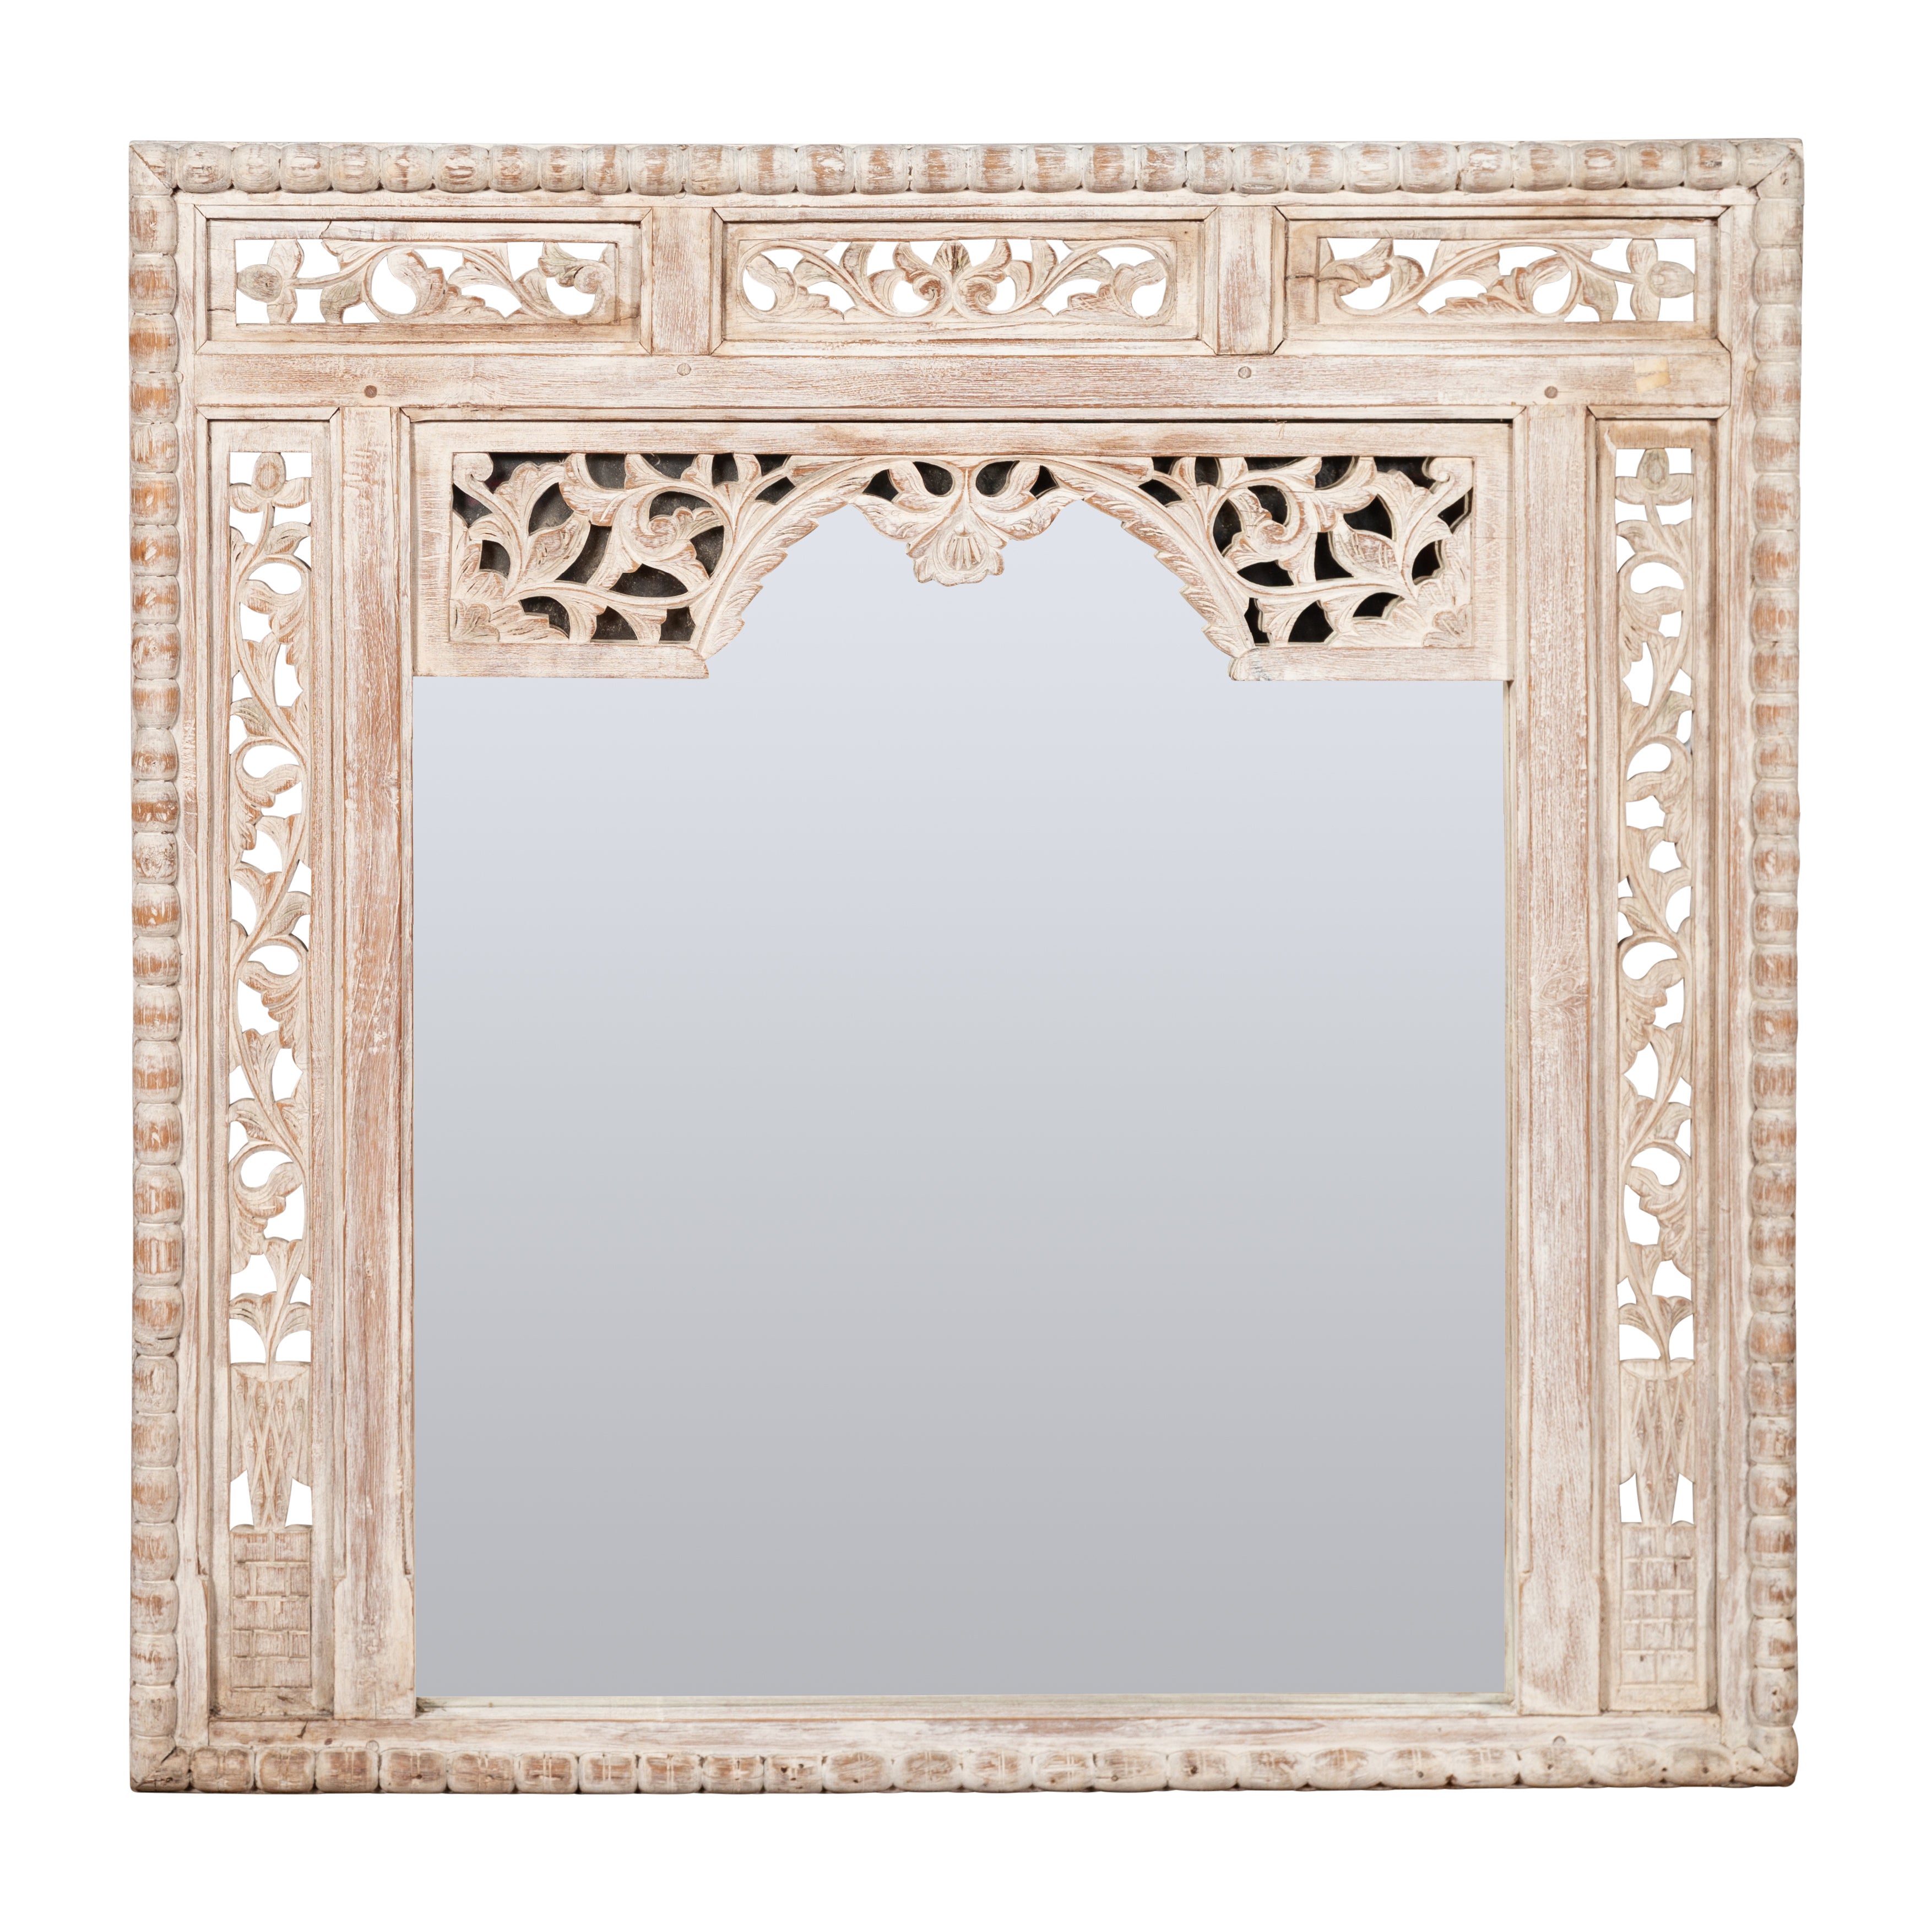 19th Century Painted Thai Mirror with Hand-Carved Scrolling Floral Décor For Sale